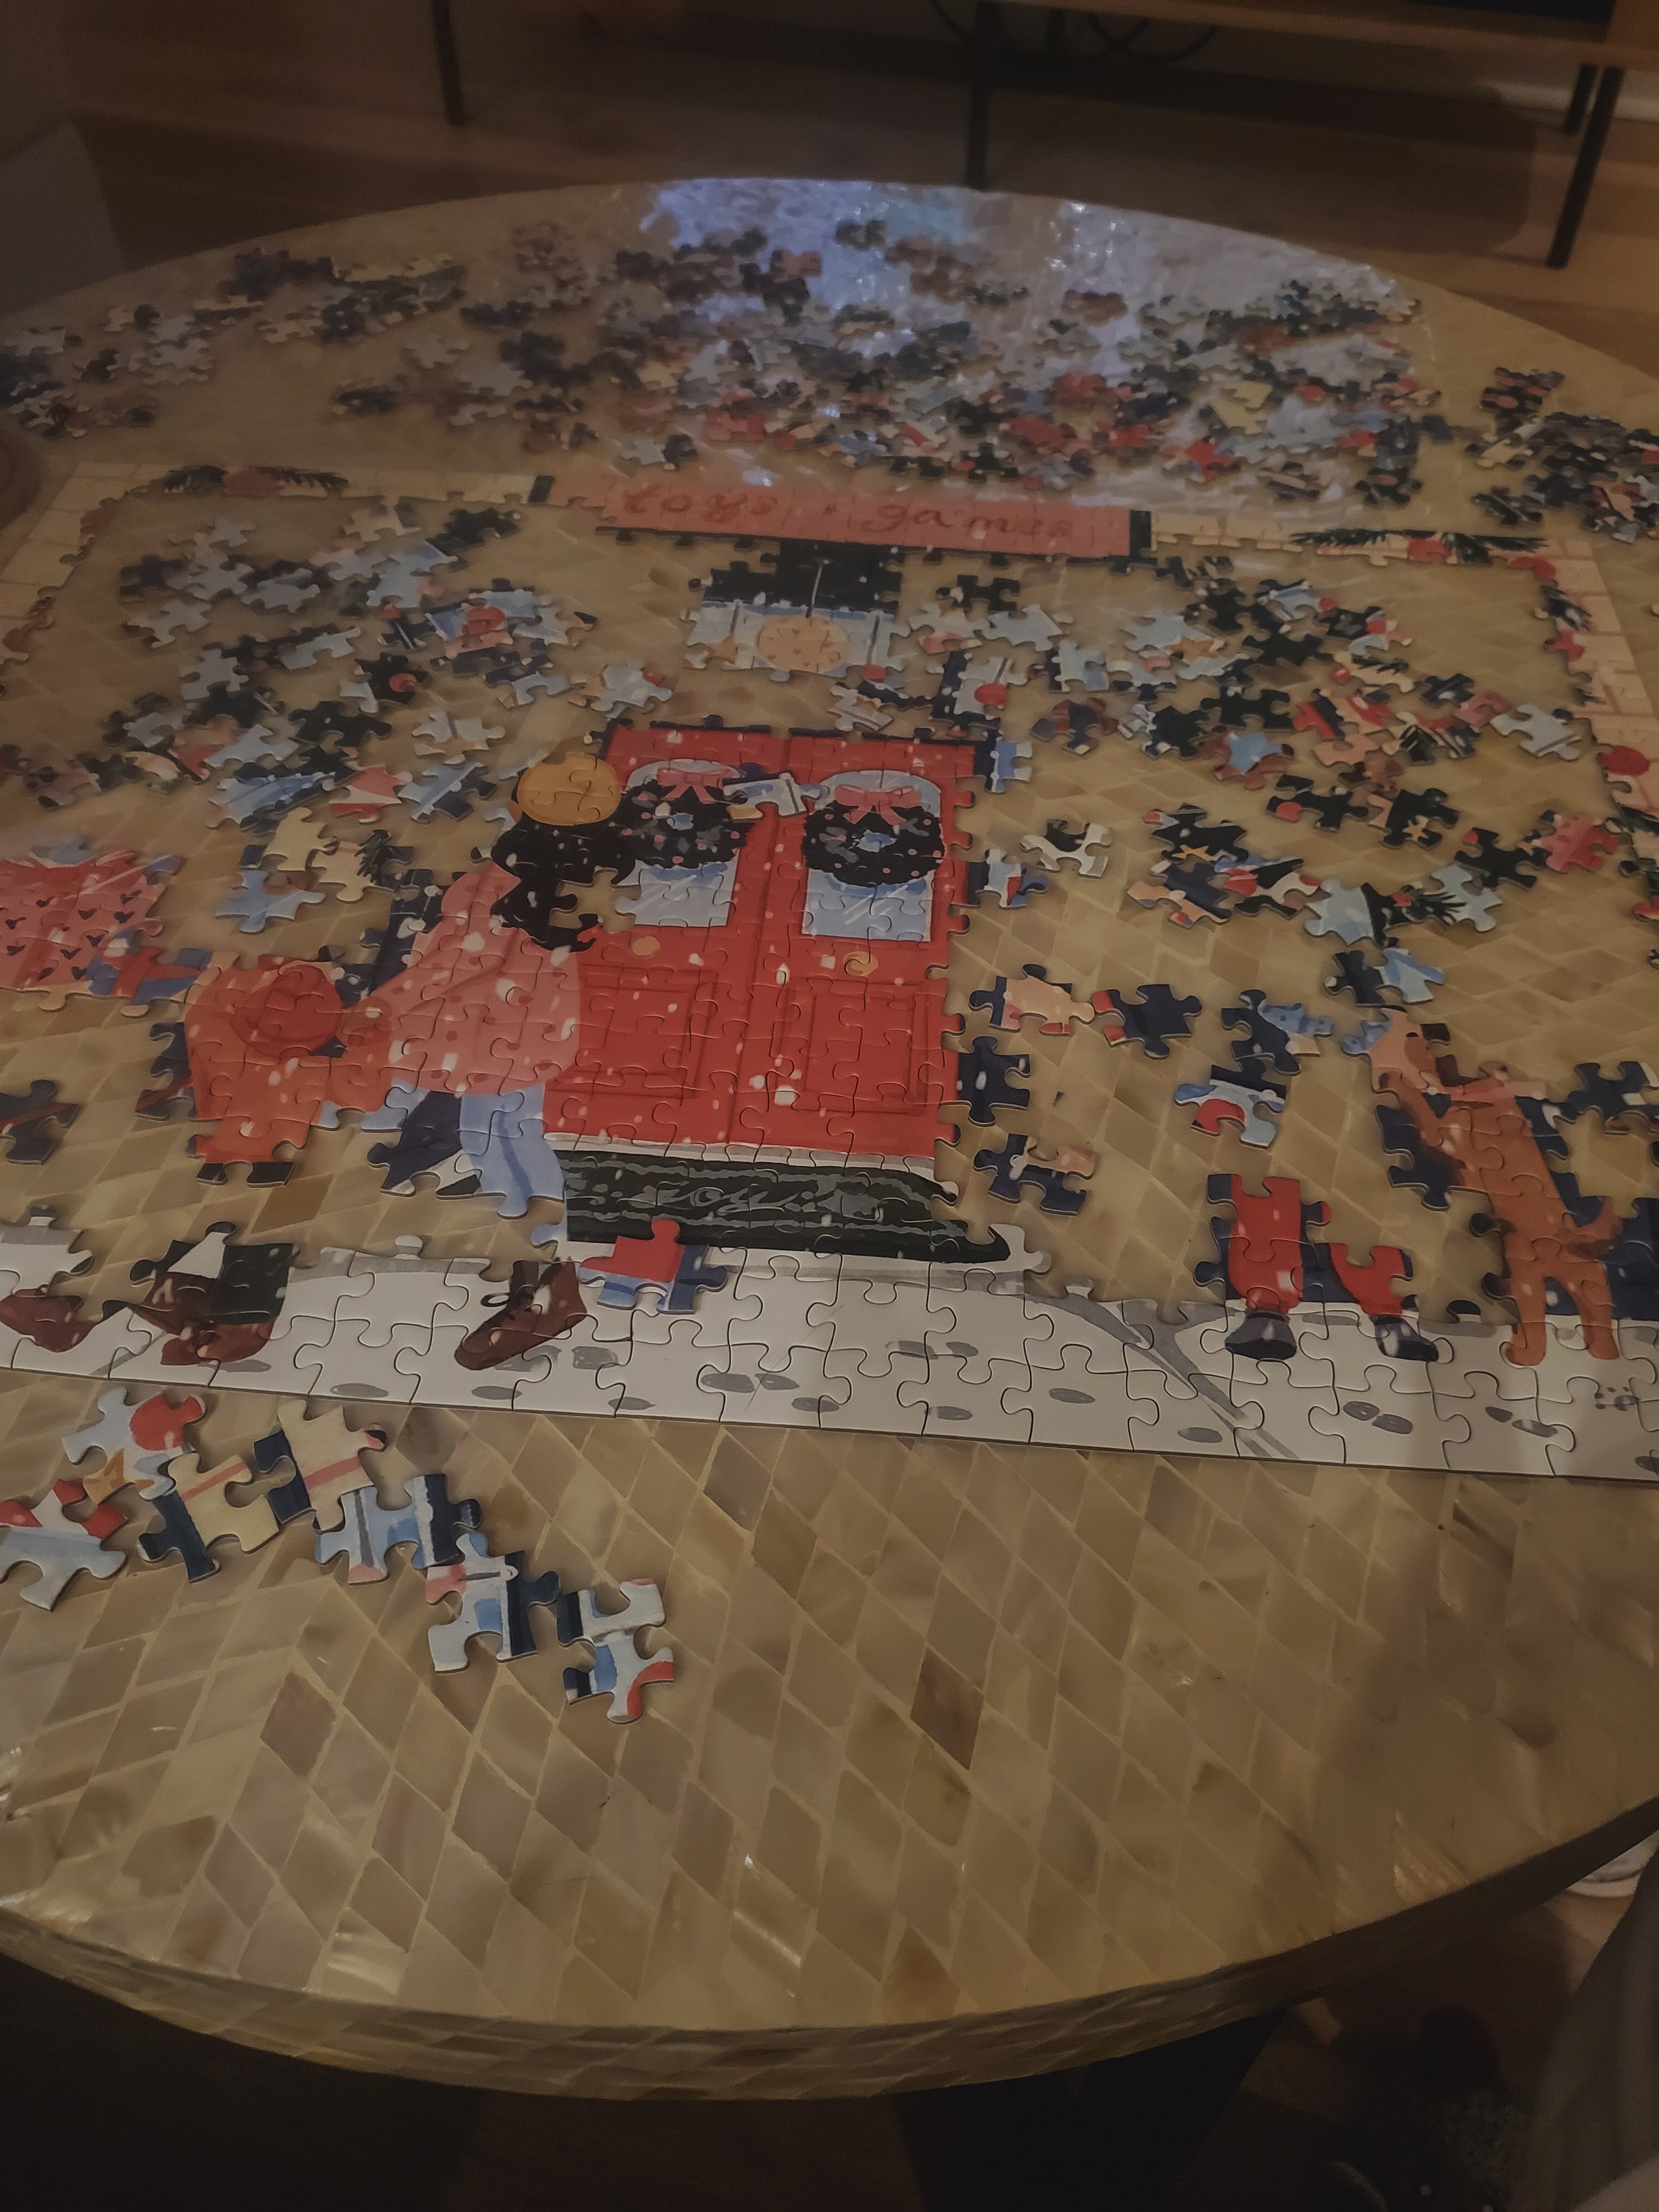  Puzzle progress after day 1. 